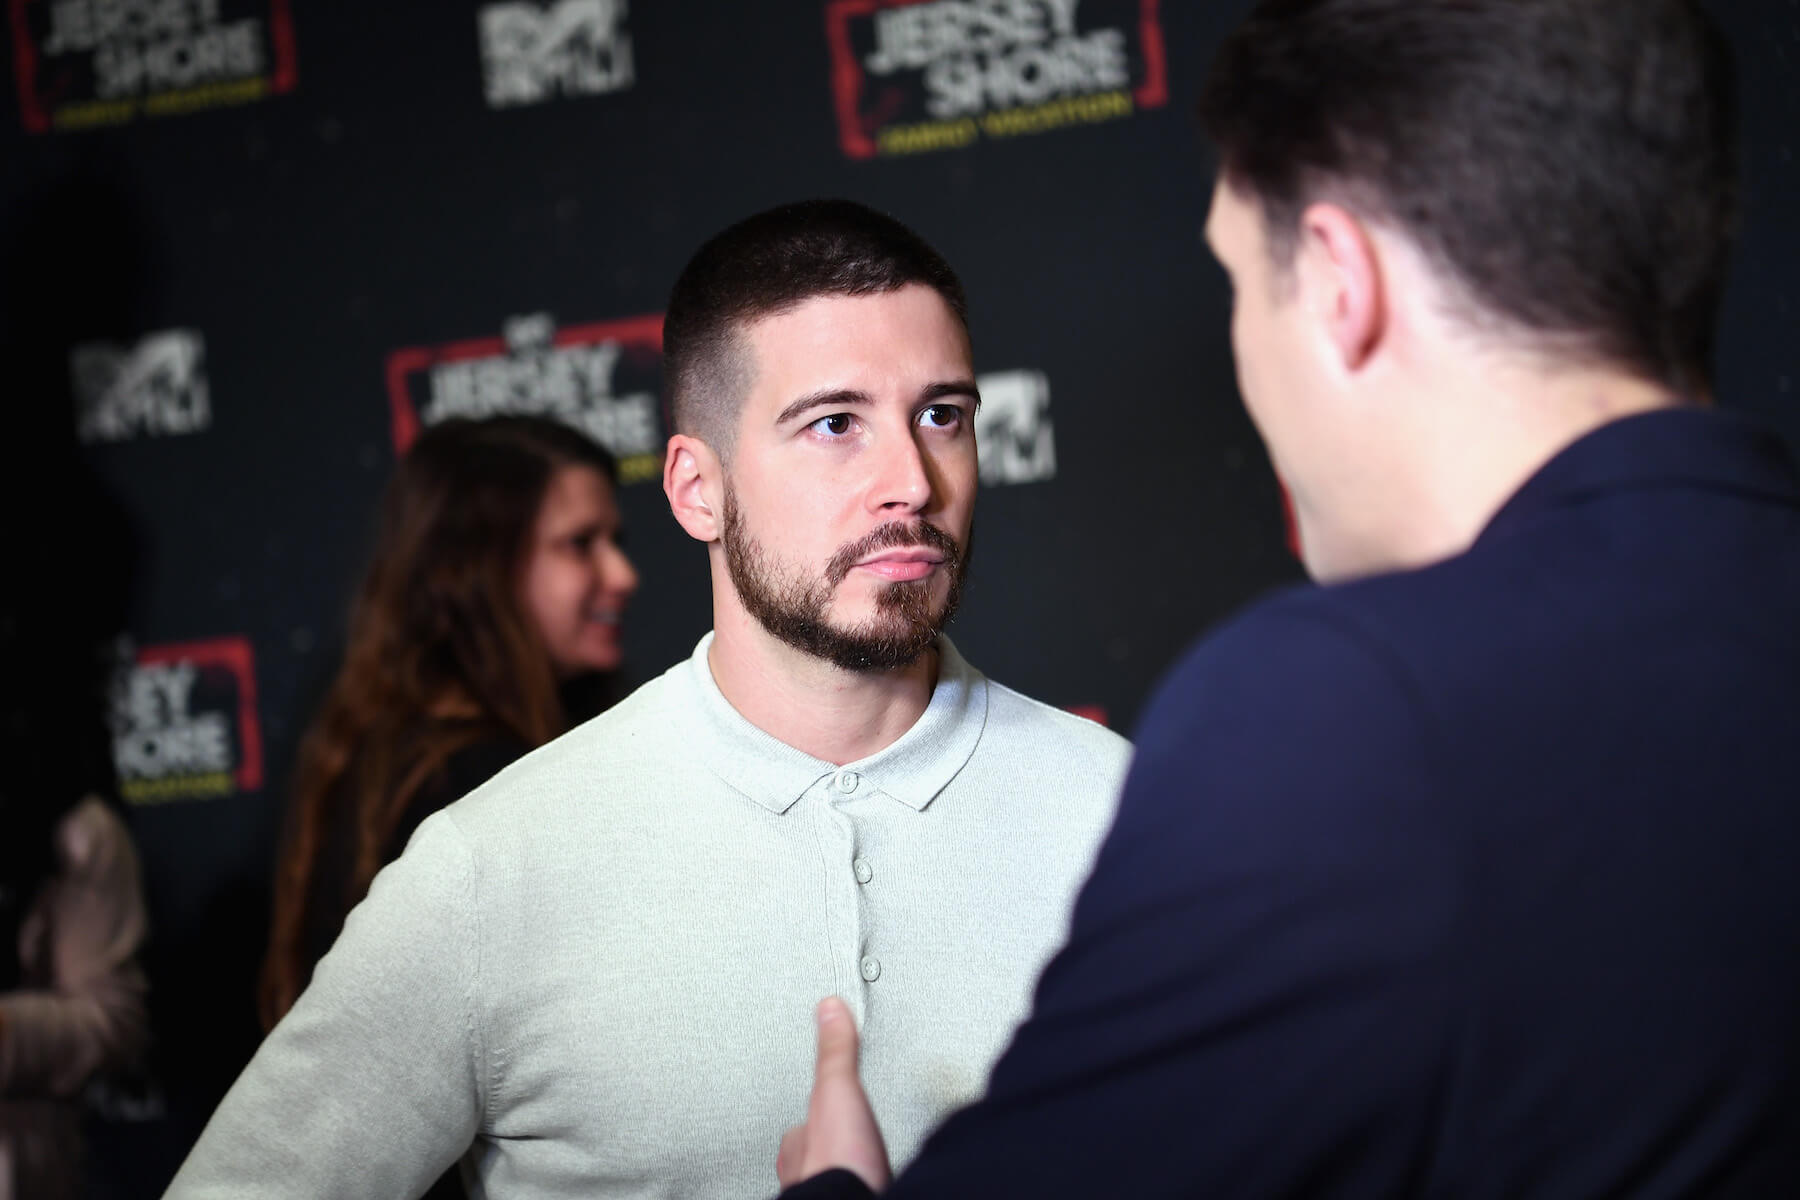 'Jersey Shore' star Vinny Guadagnino speaking to someone at an MTV event